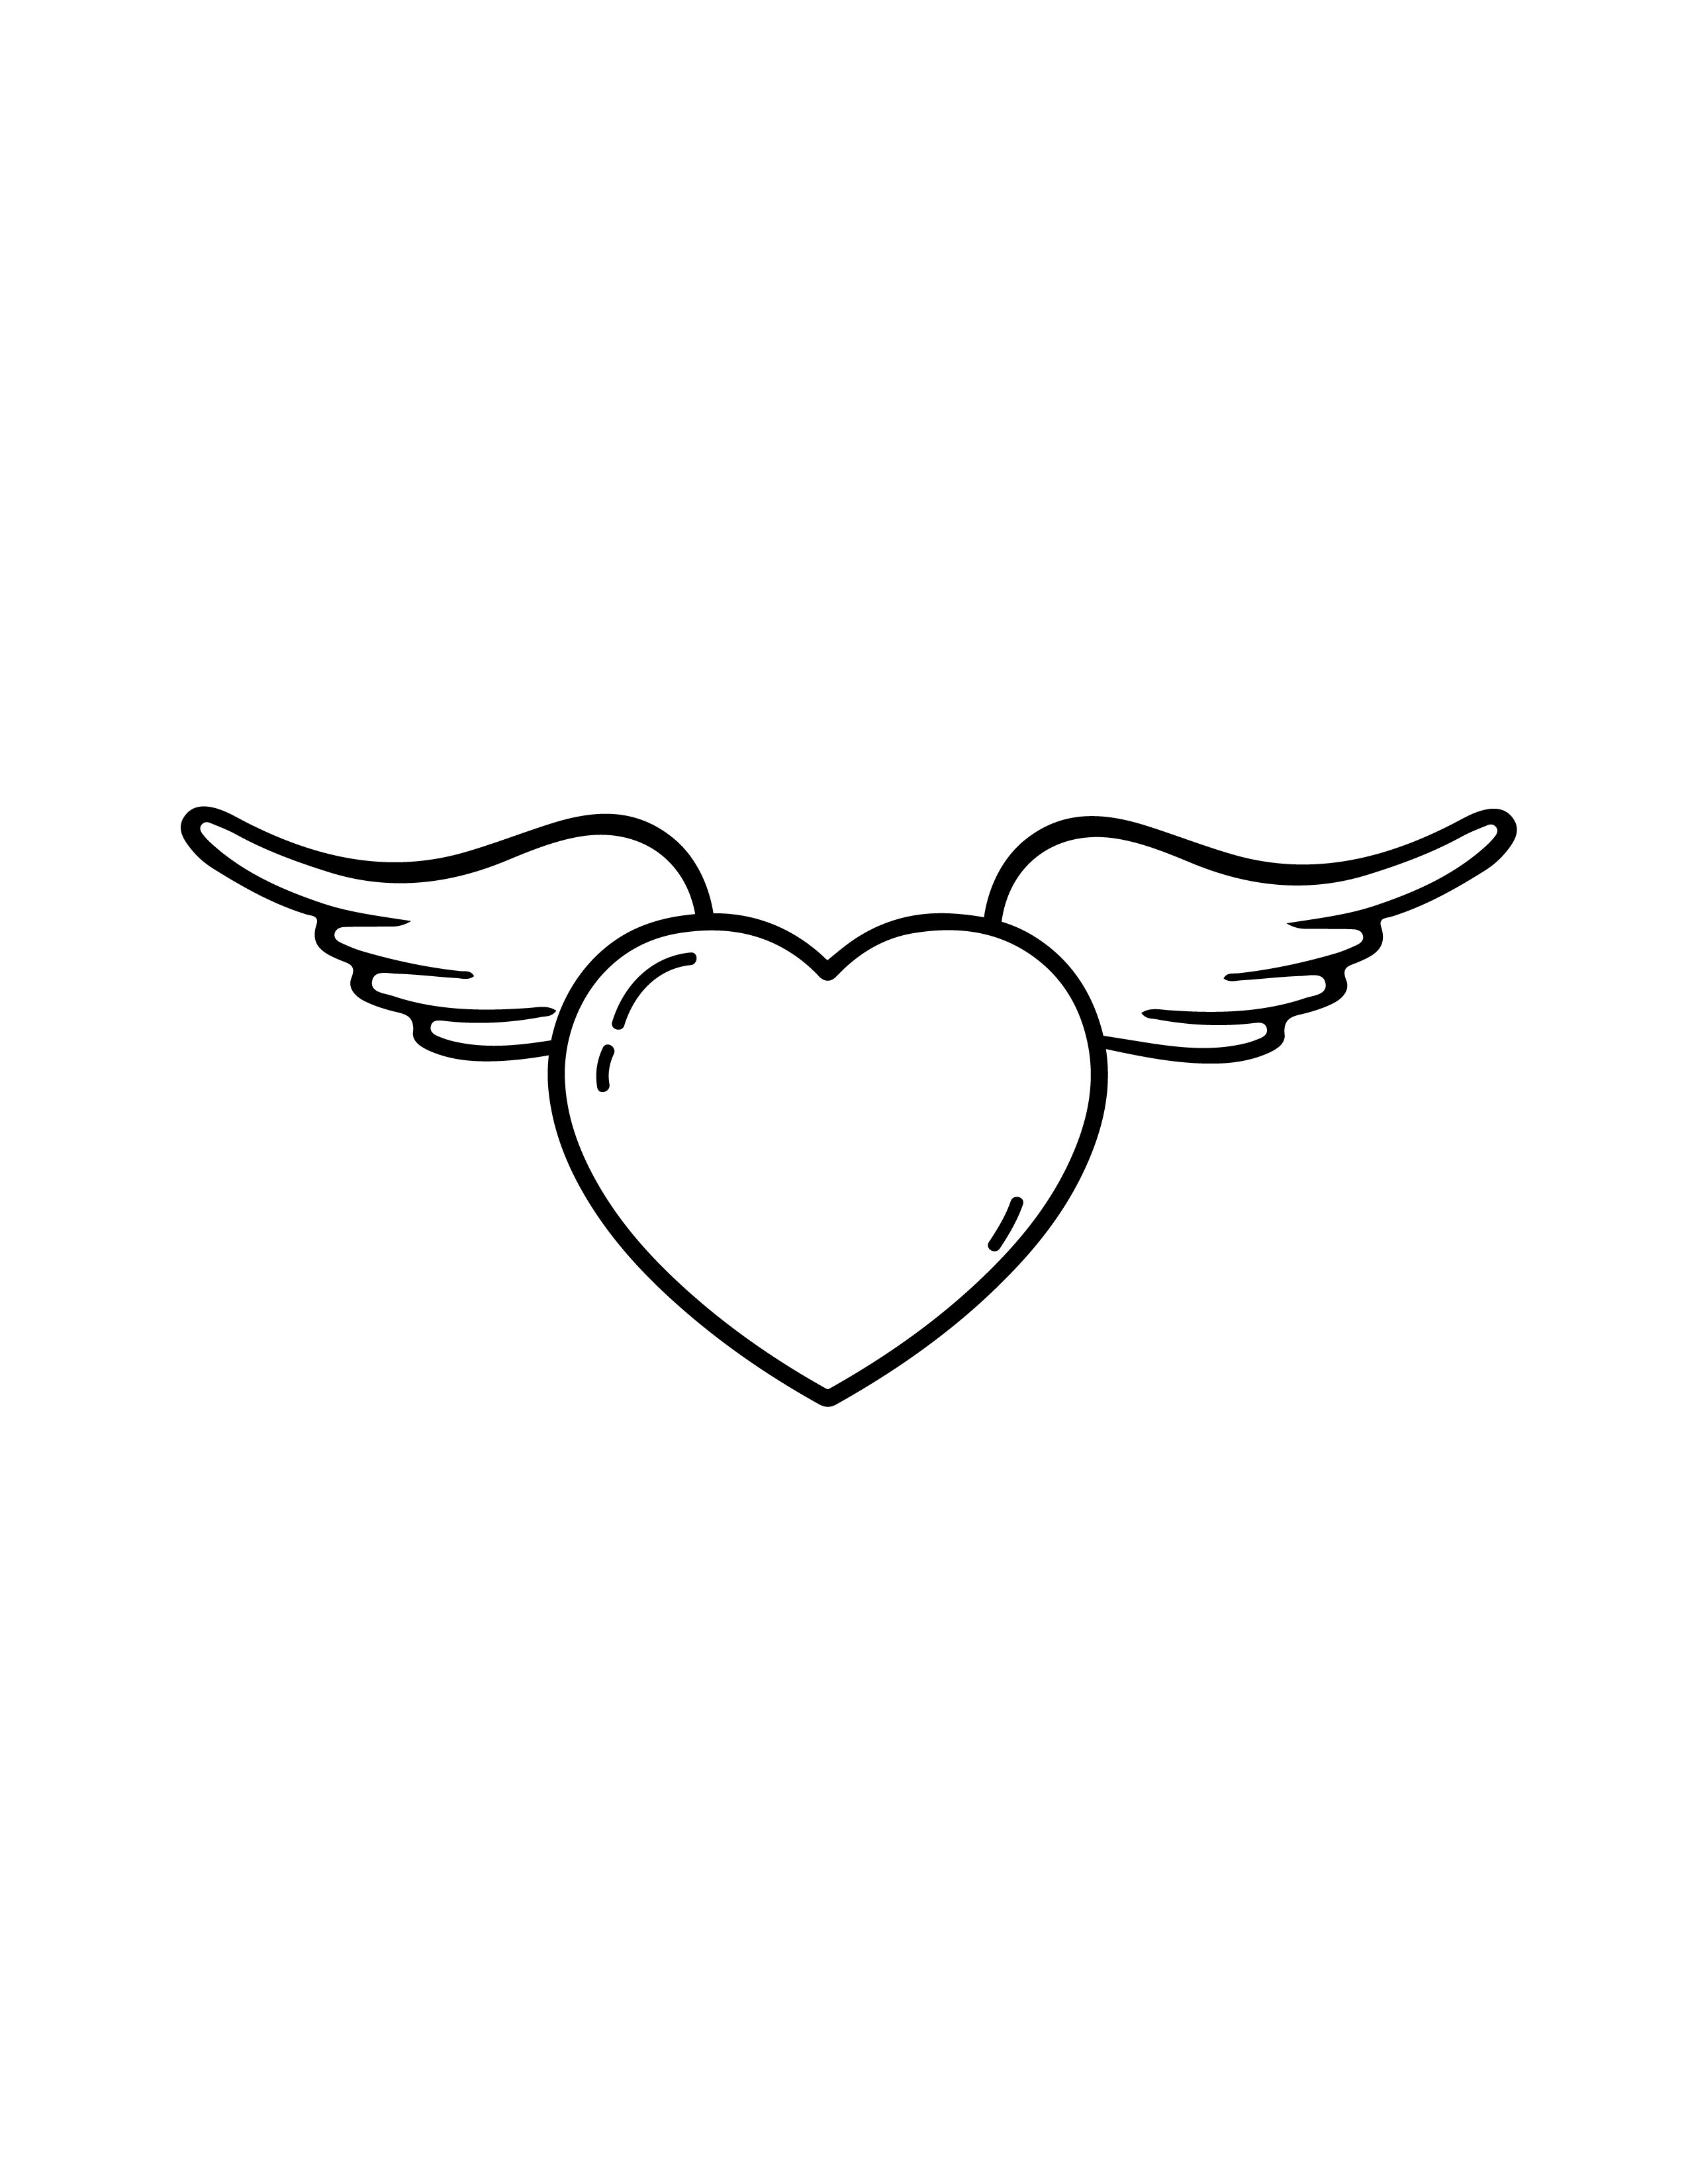 Free Love Drawing Heart With Wings Download in PDF, Illustrator, EPS